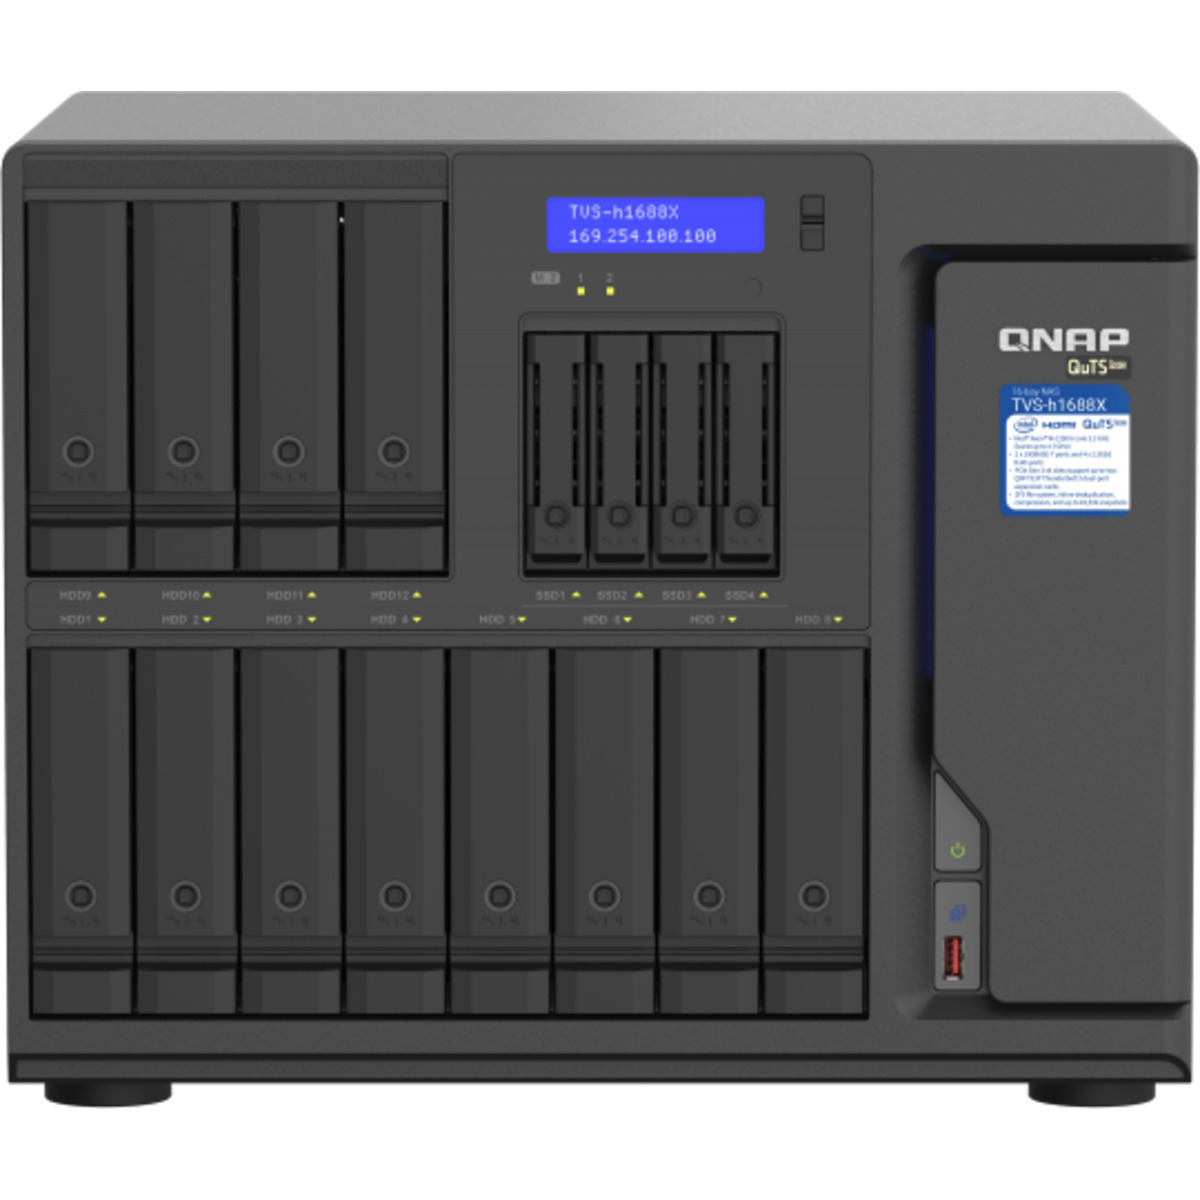 QNAP TVS-h1688X QuTS hero NAS 80tb 12+4-Bay Desktop Multimedia / Power User / Business NAS - Network Attached Storage Device 8x10tb Seagate EXOS X18 ST10000NM018G 3.5 7200rpm SATA 6Gb/s HDD ENTERPRISE Class Drives Installed - Burn-In Tested TVS-h1688X QuTS hero NAS